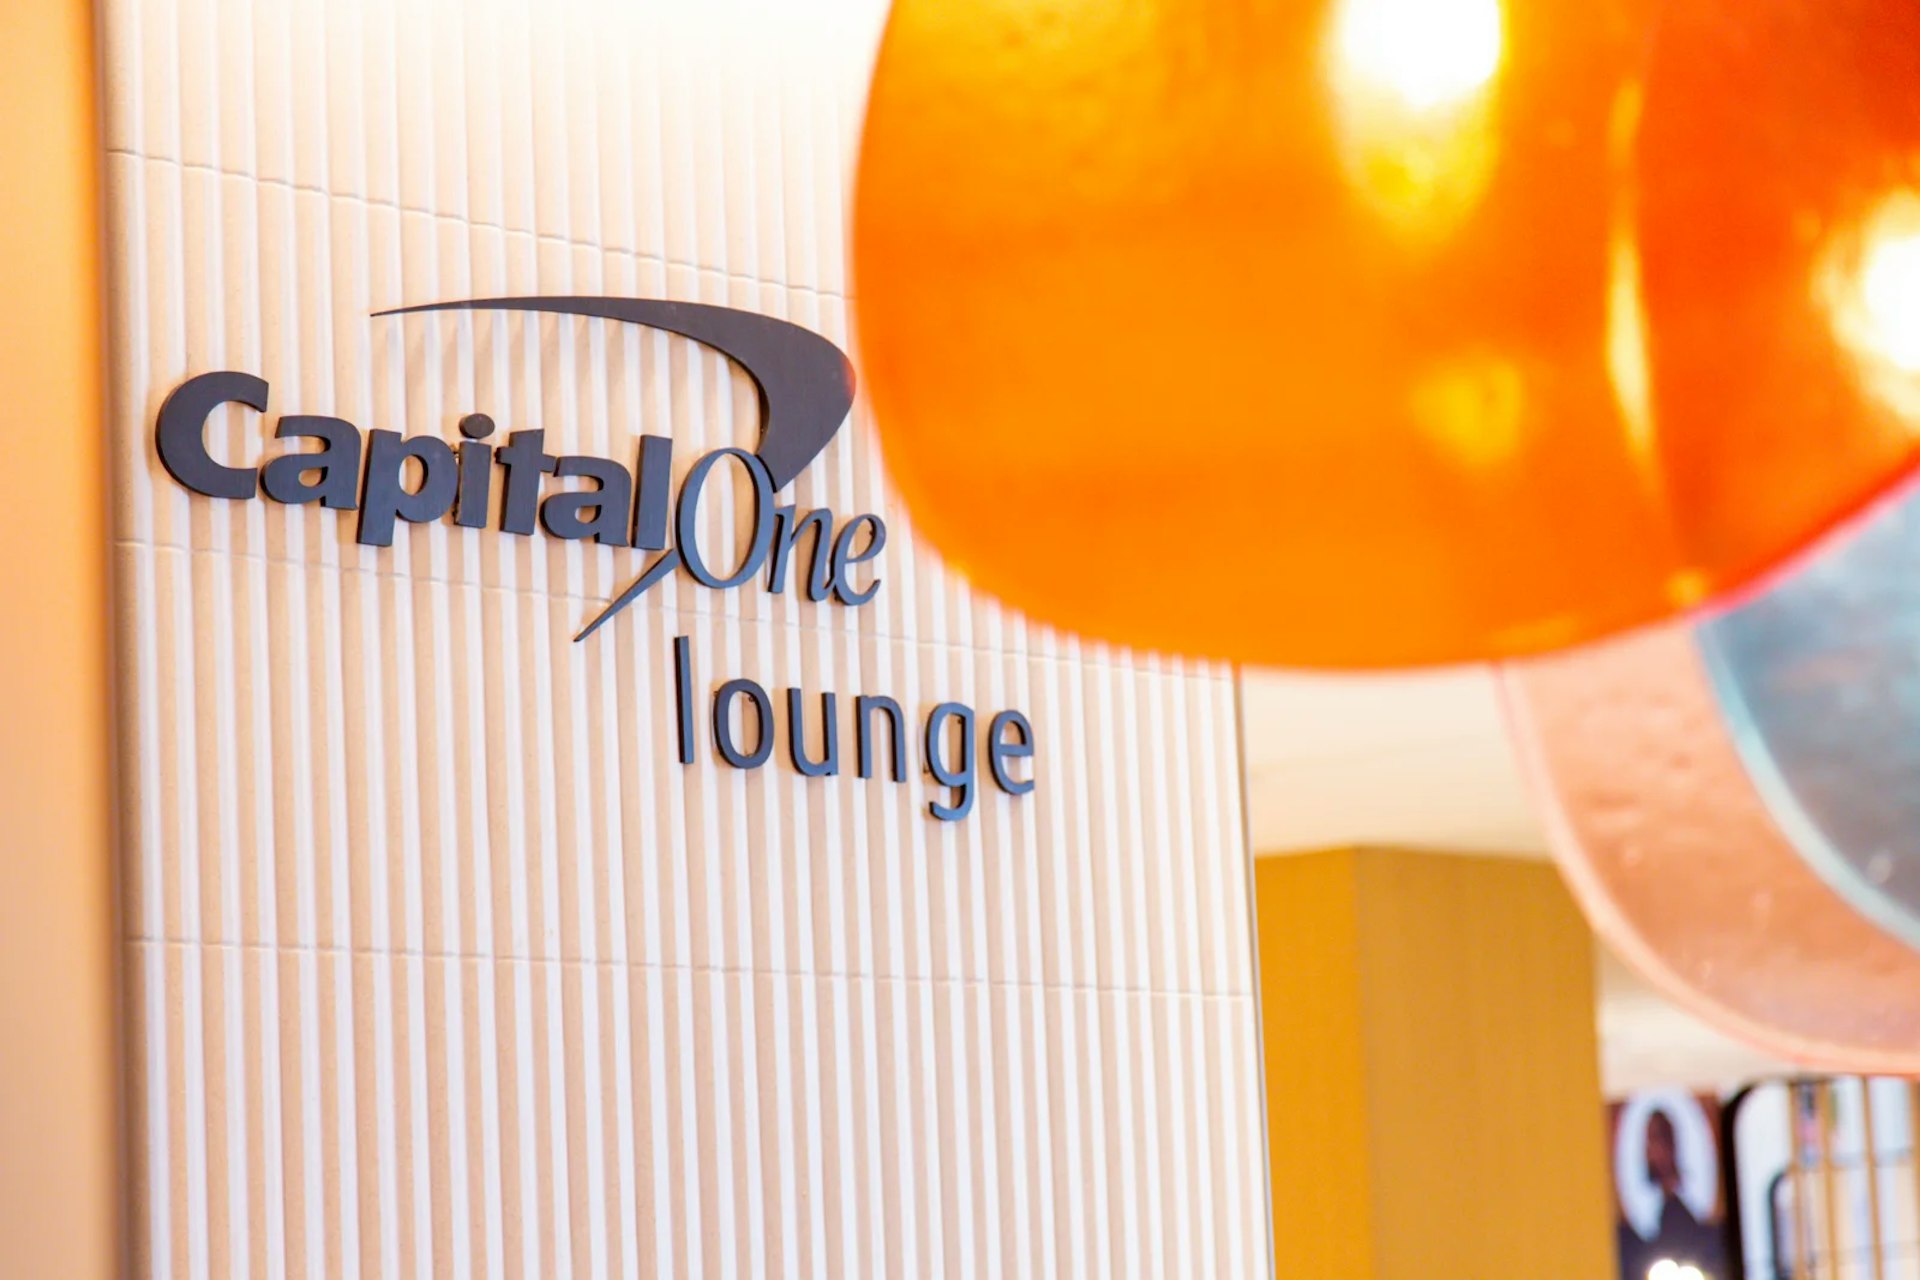 The Capital One Lounge at Dallas-Fort Worth International Airport